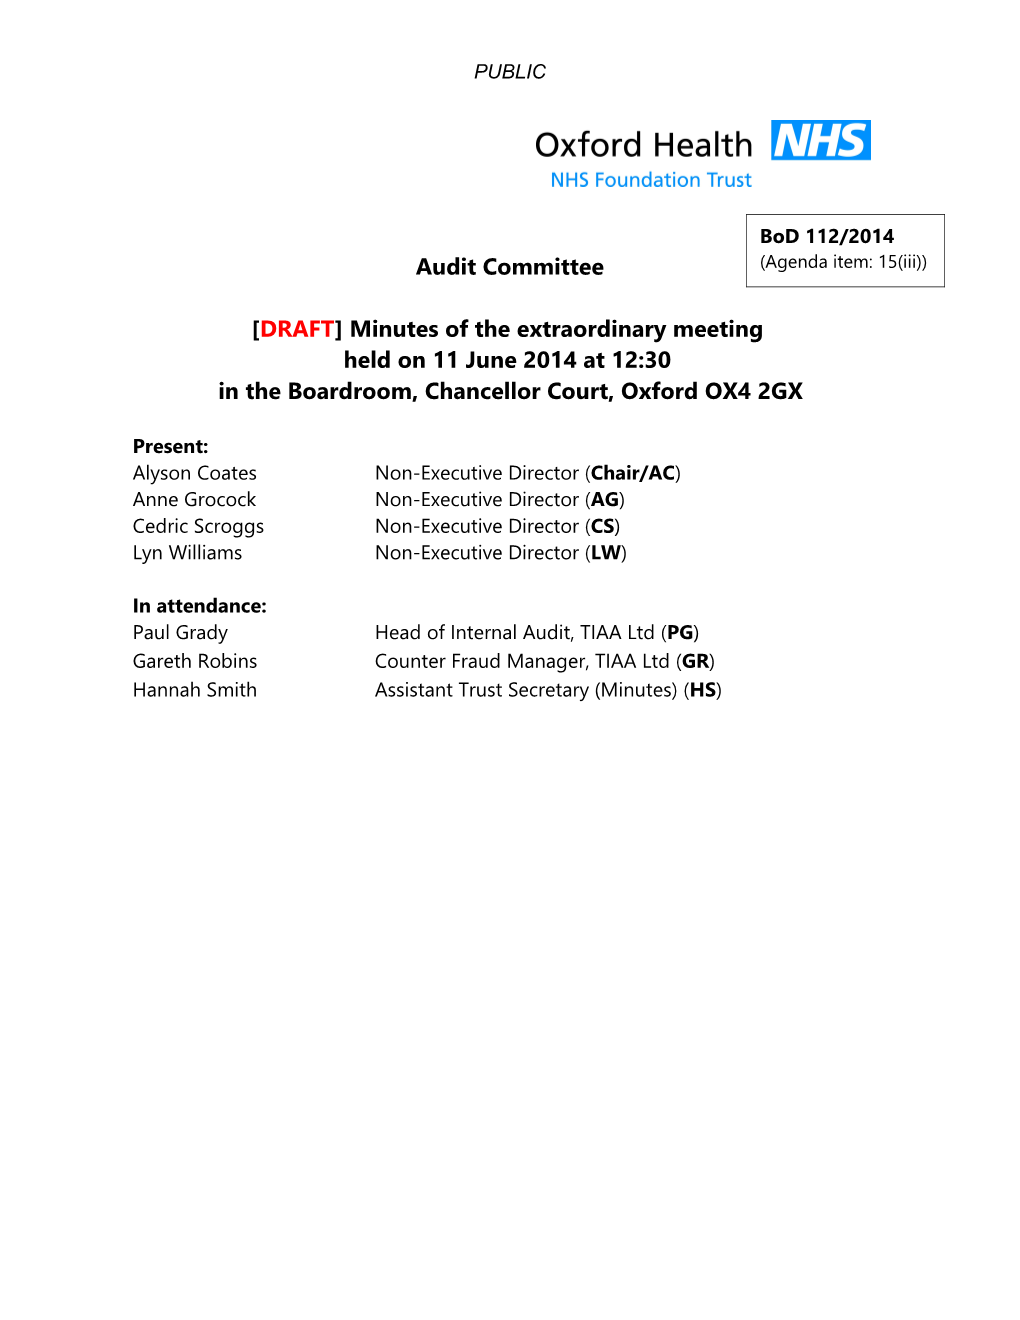 PUBLIC Minutes of the Audit Committee,11 June 2014